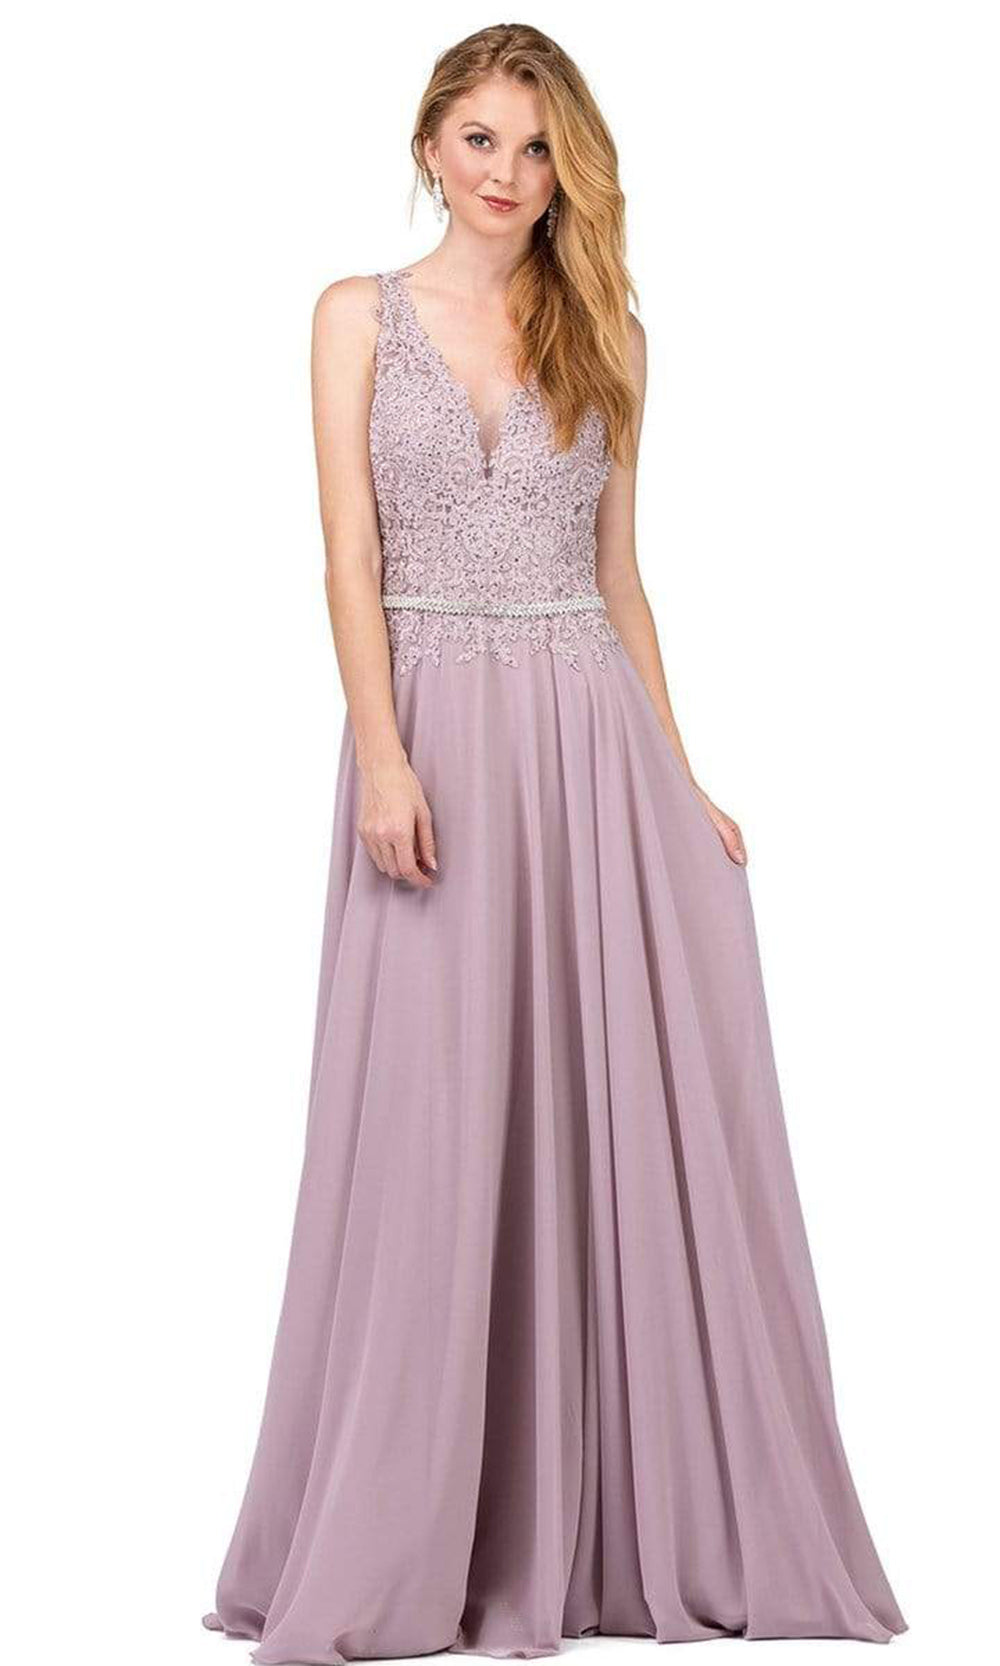 Dancing Queen - Beaded Lace V-neck A-line Prom Dress 2161 - 1 pc Mocha In Size XS Available CCSALE XS / Mocha